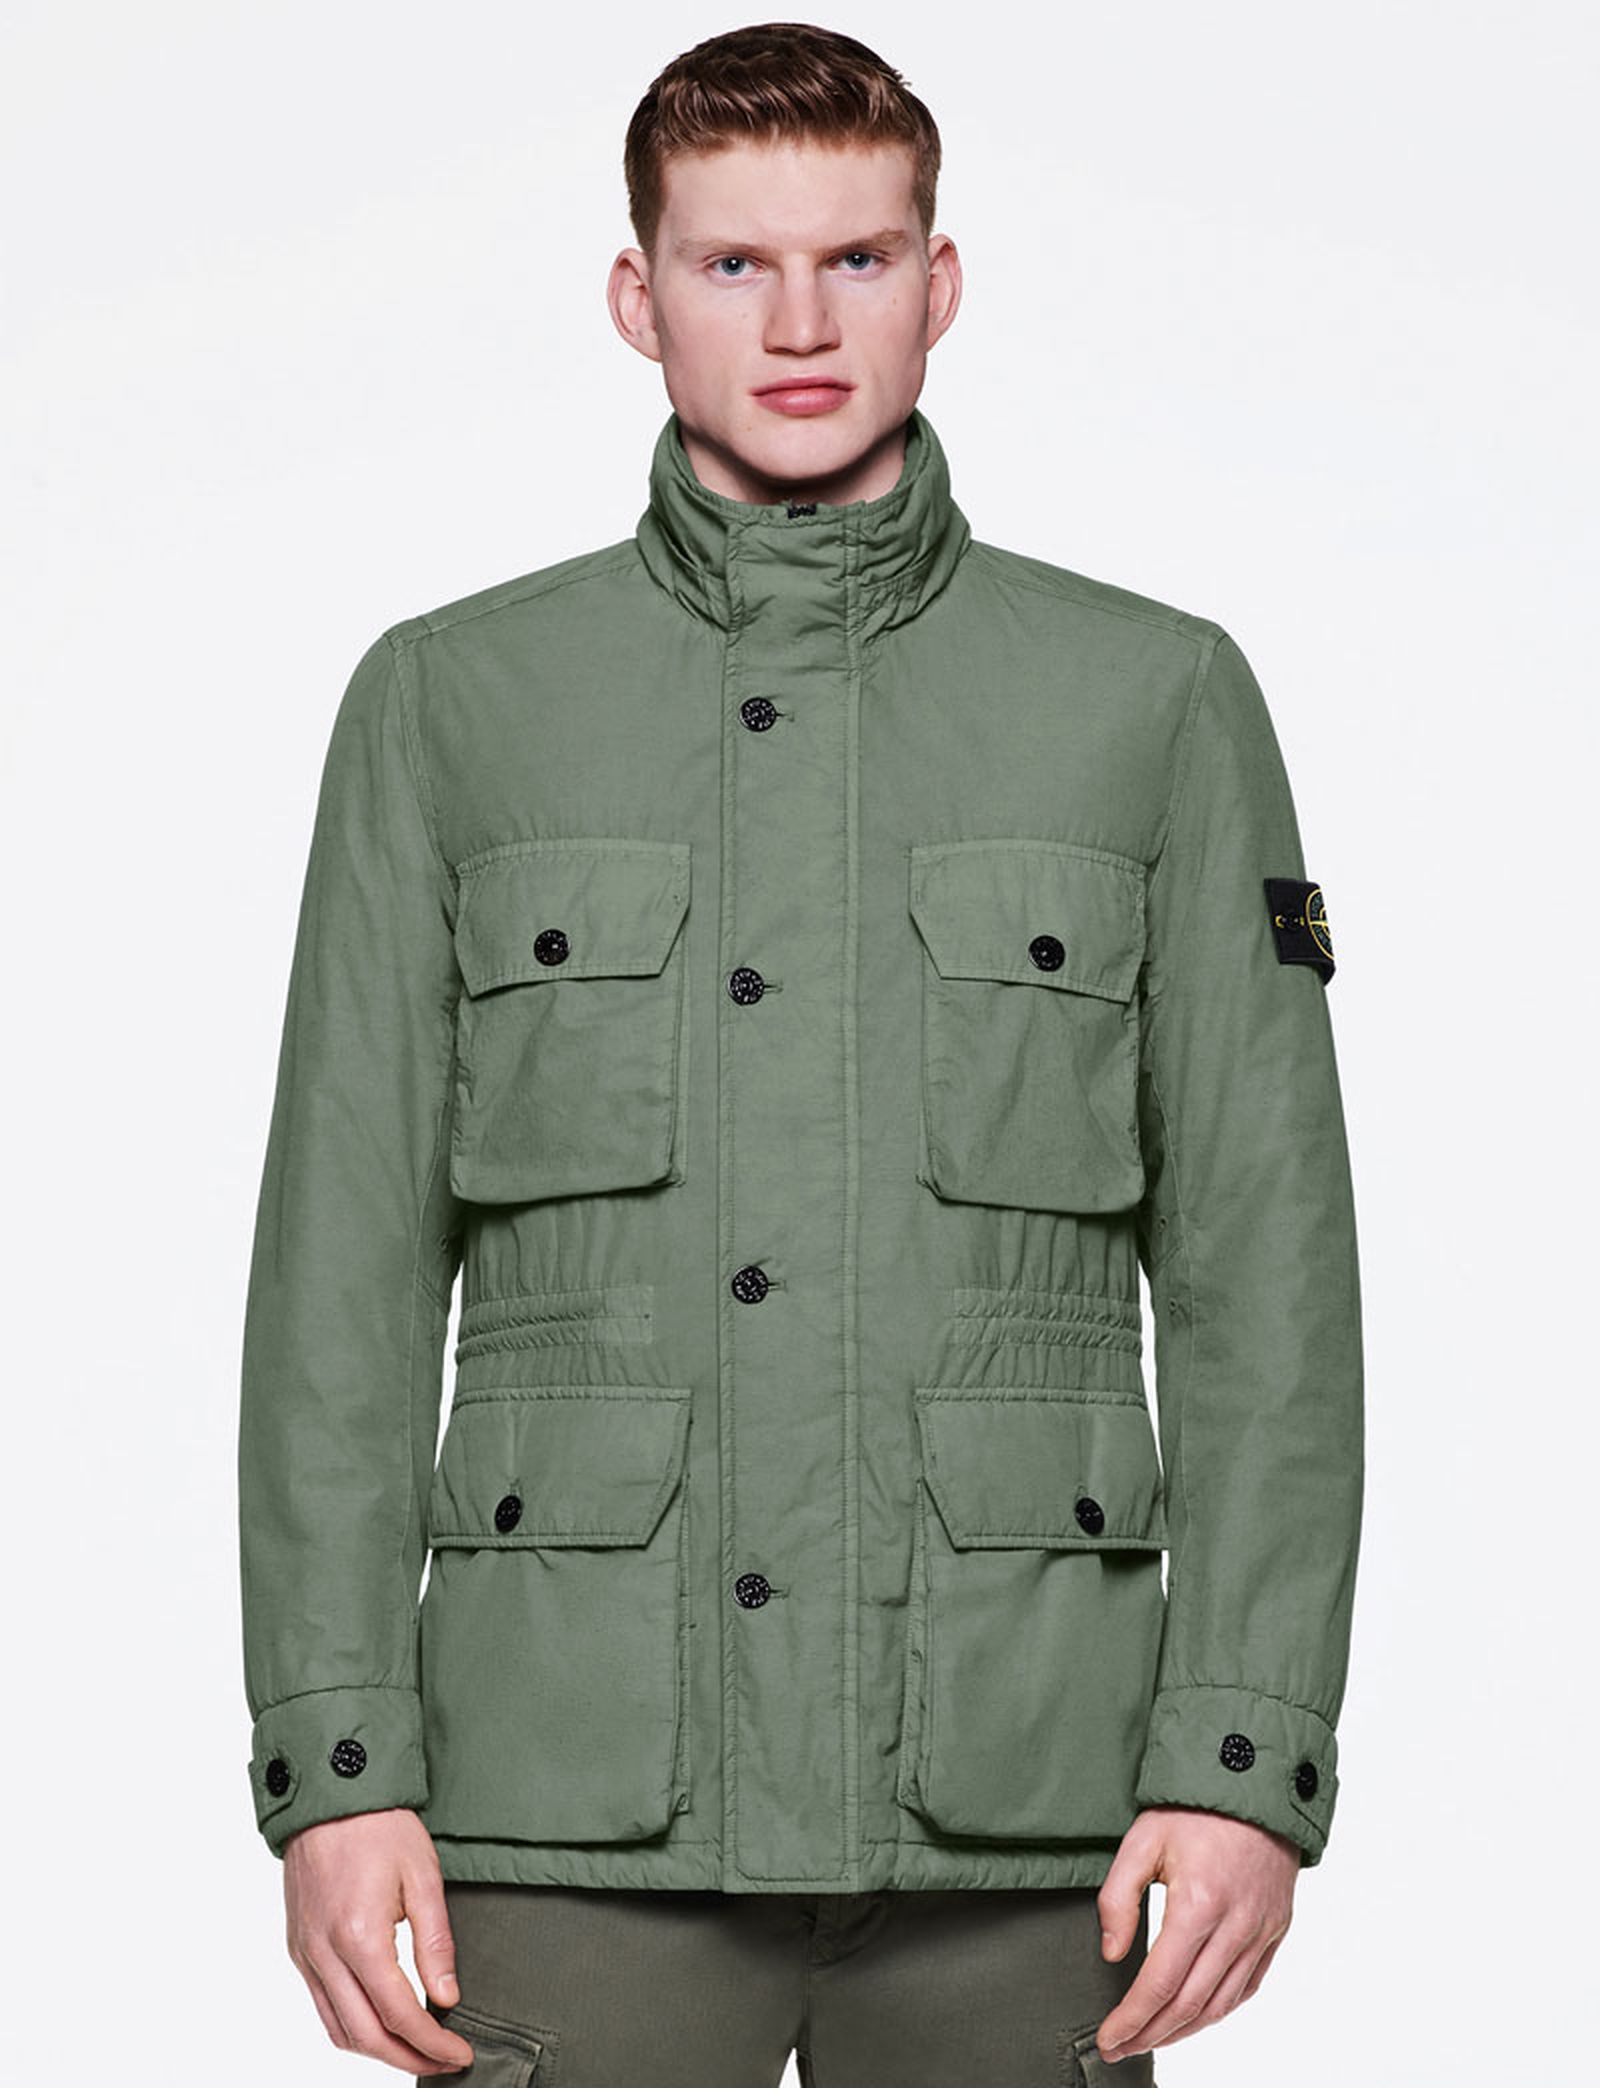 stone-island-fw21-icon-imagery-collection-10